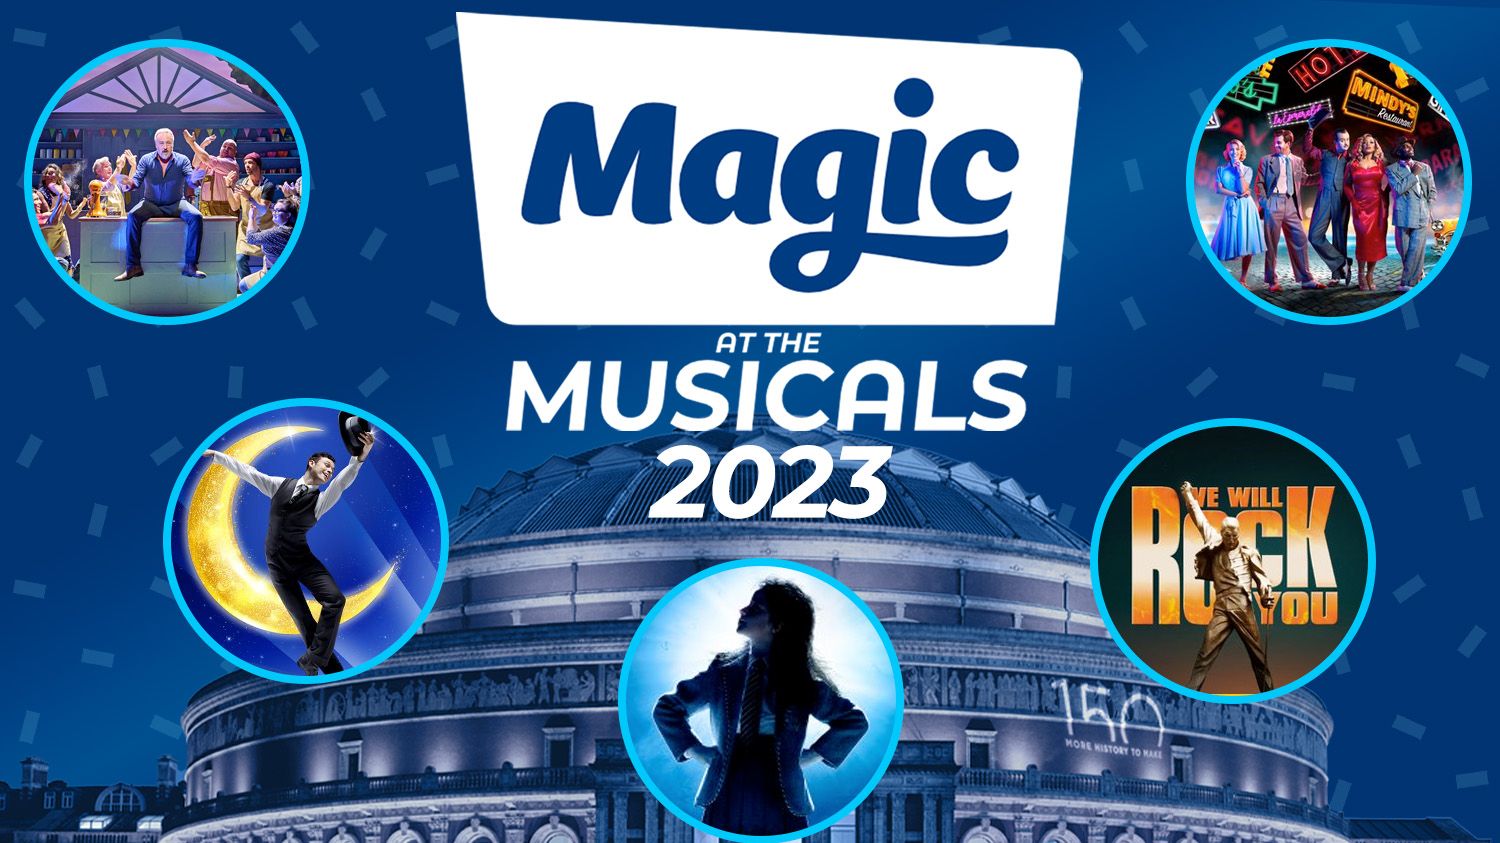 Magic at the Musicals 2023, who's performing, when is it and tickets